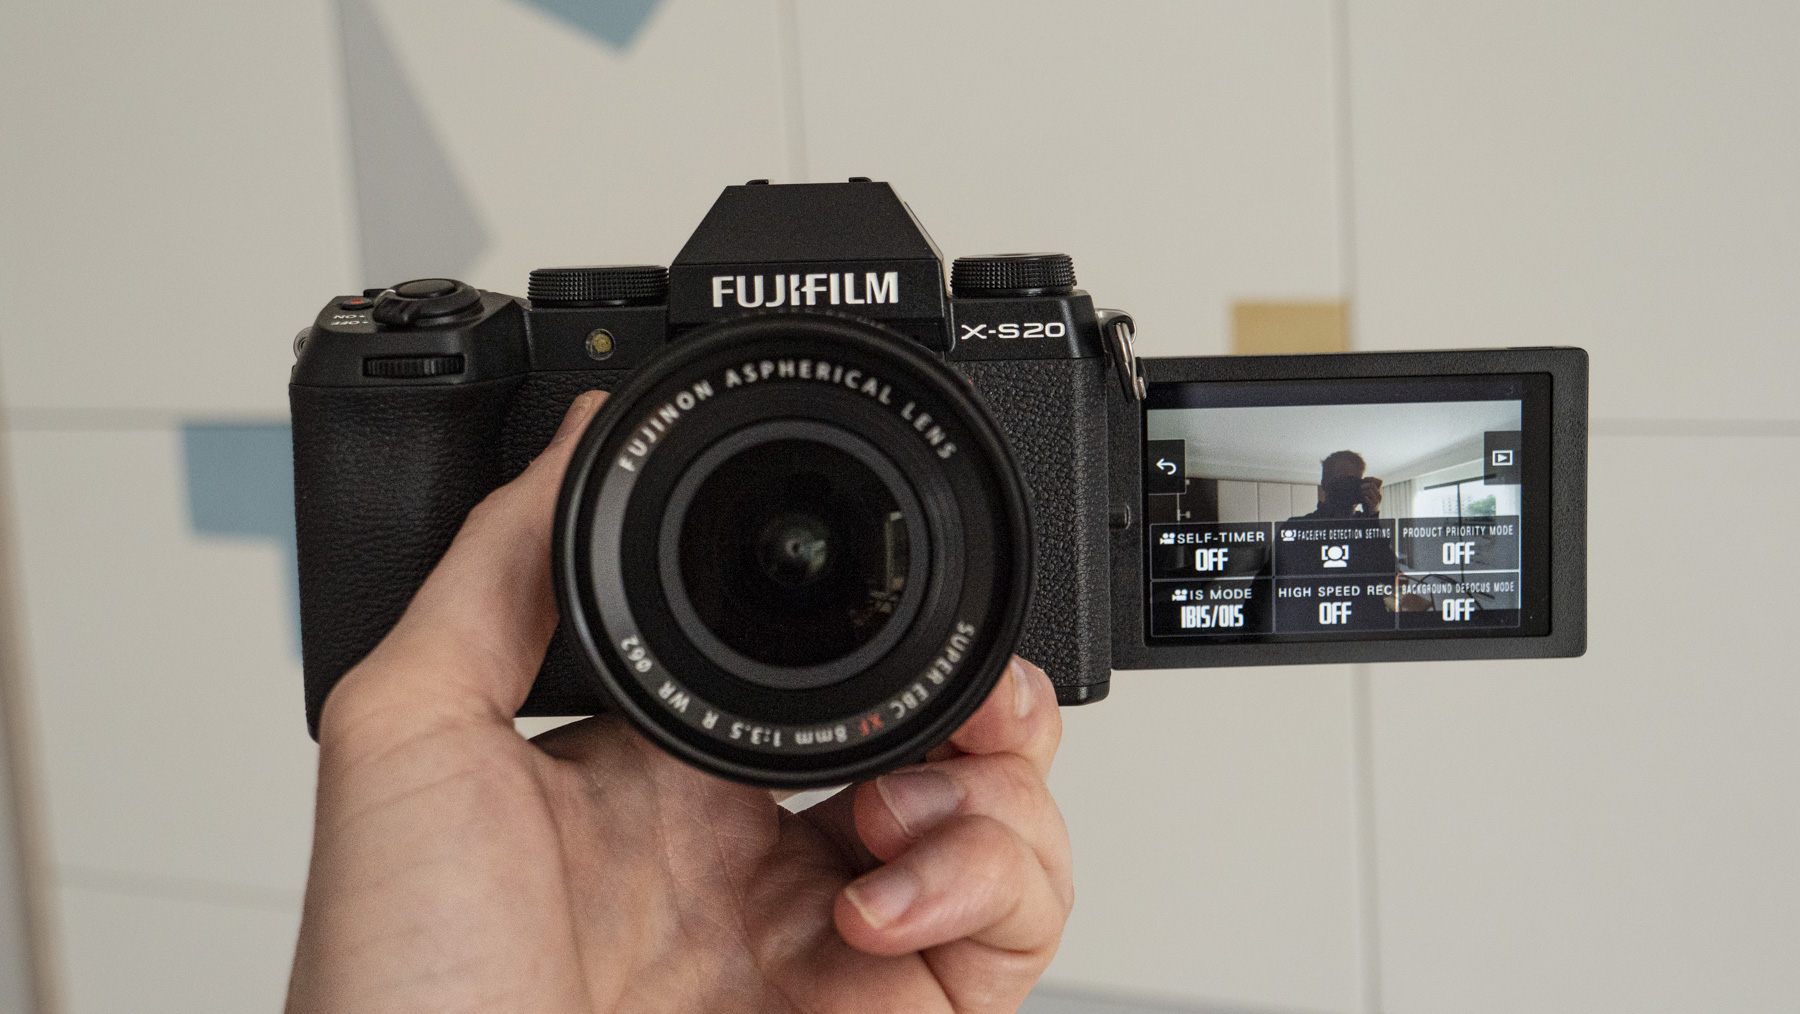 Fujifilm X-S20 camera with screen flipped out to the side in vlogging mode